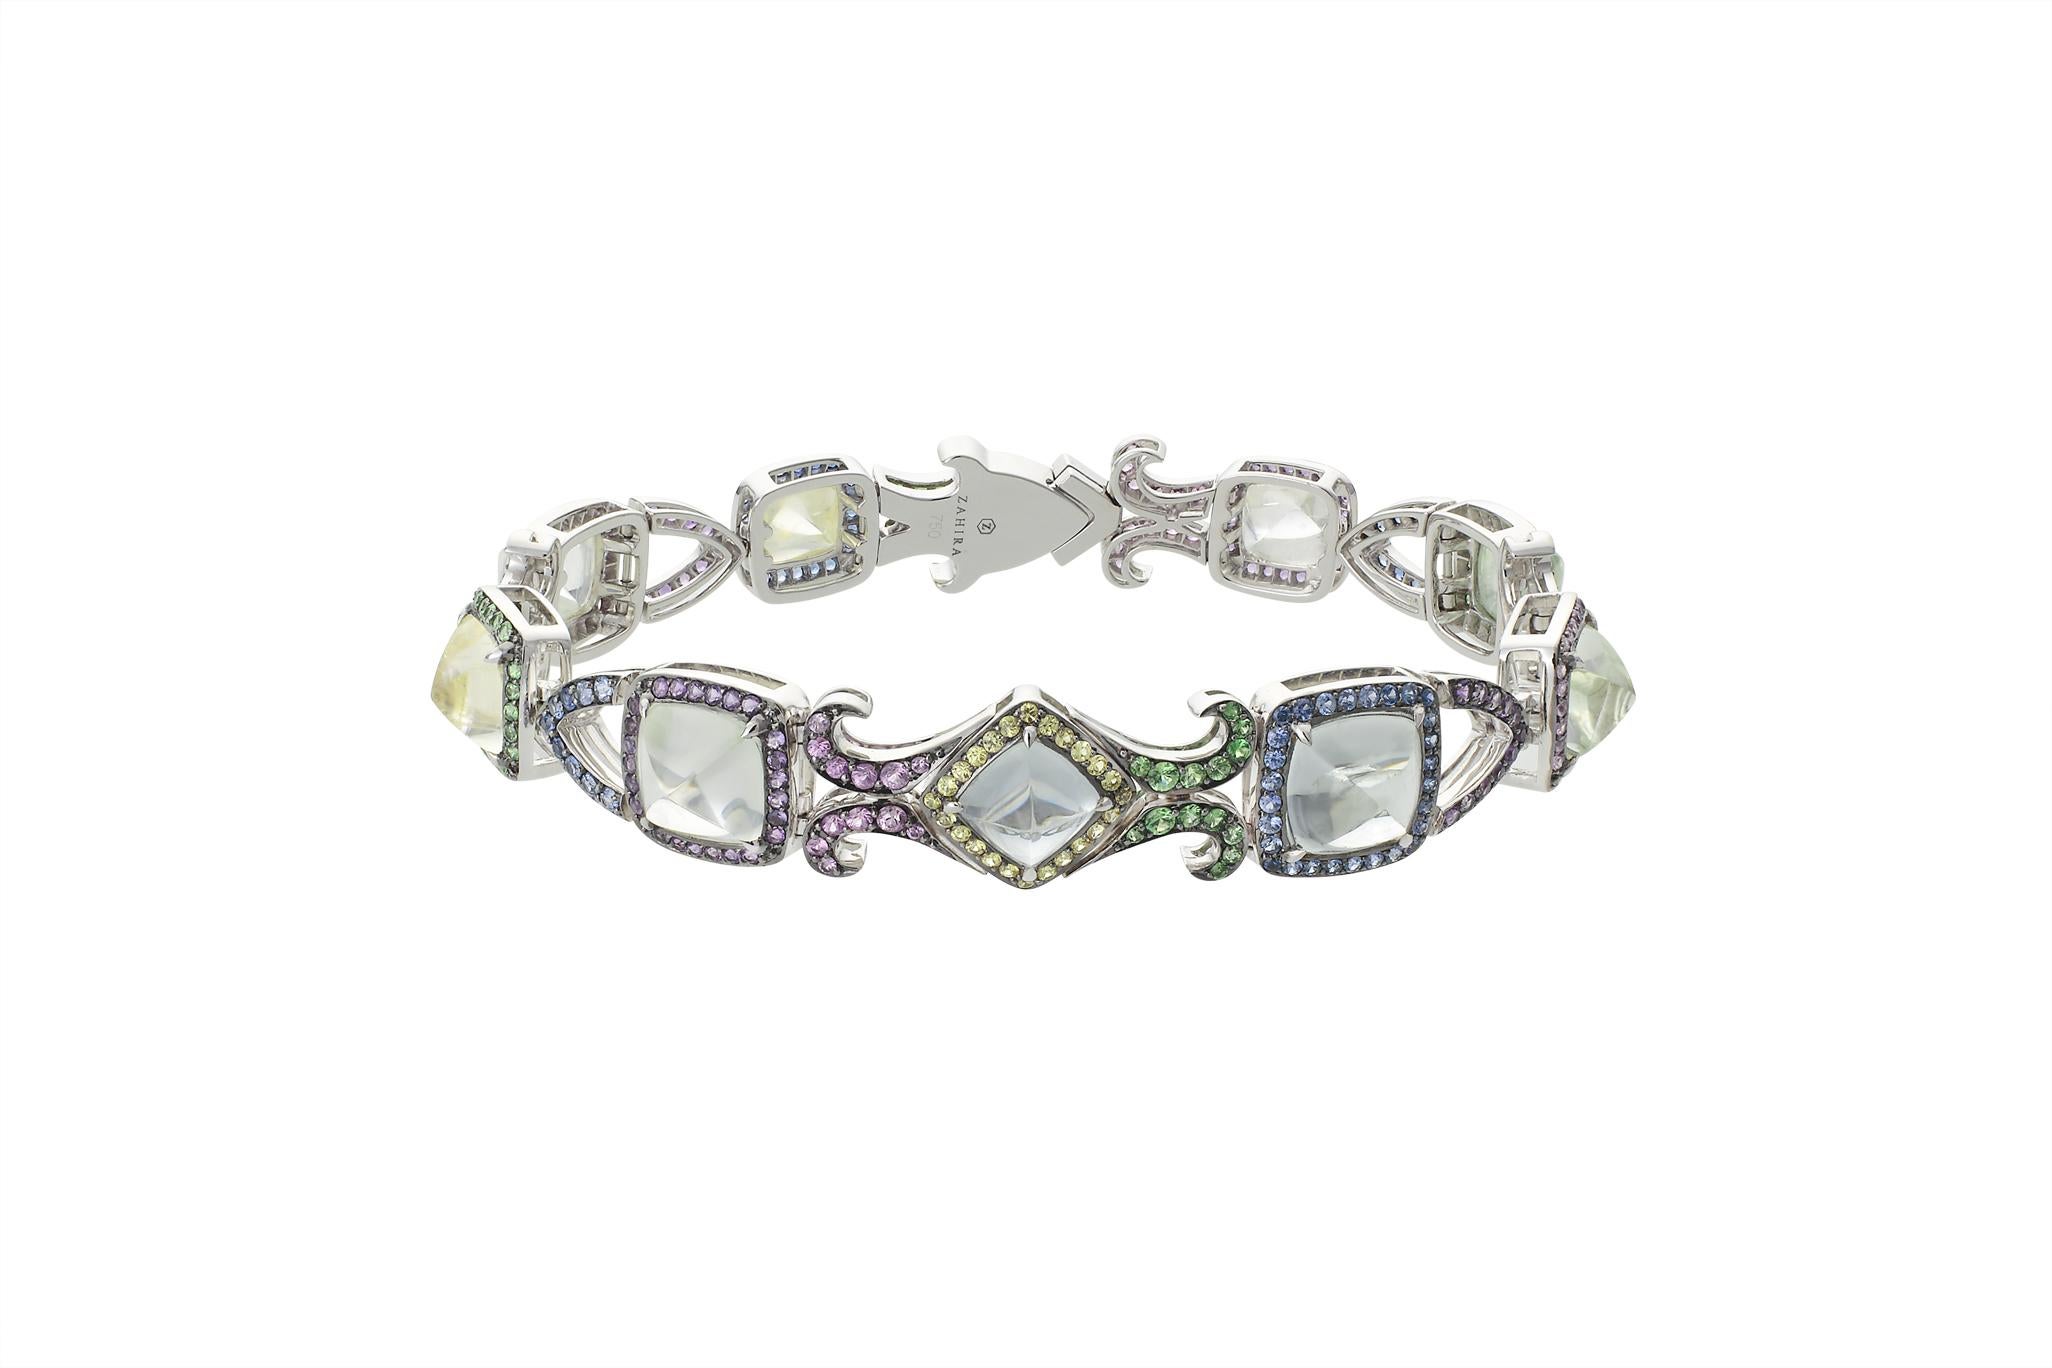 This rare Burmese sugarloaf sapphire bracelet is part of a three piece set. The 24.5cts of fancy sapphires are delicately set with pave'd coloured sapphires, tsavorite and amethyst in our signature colour change technique. Feminine and intricate,